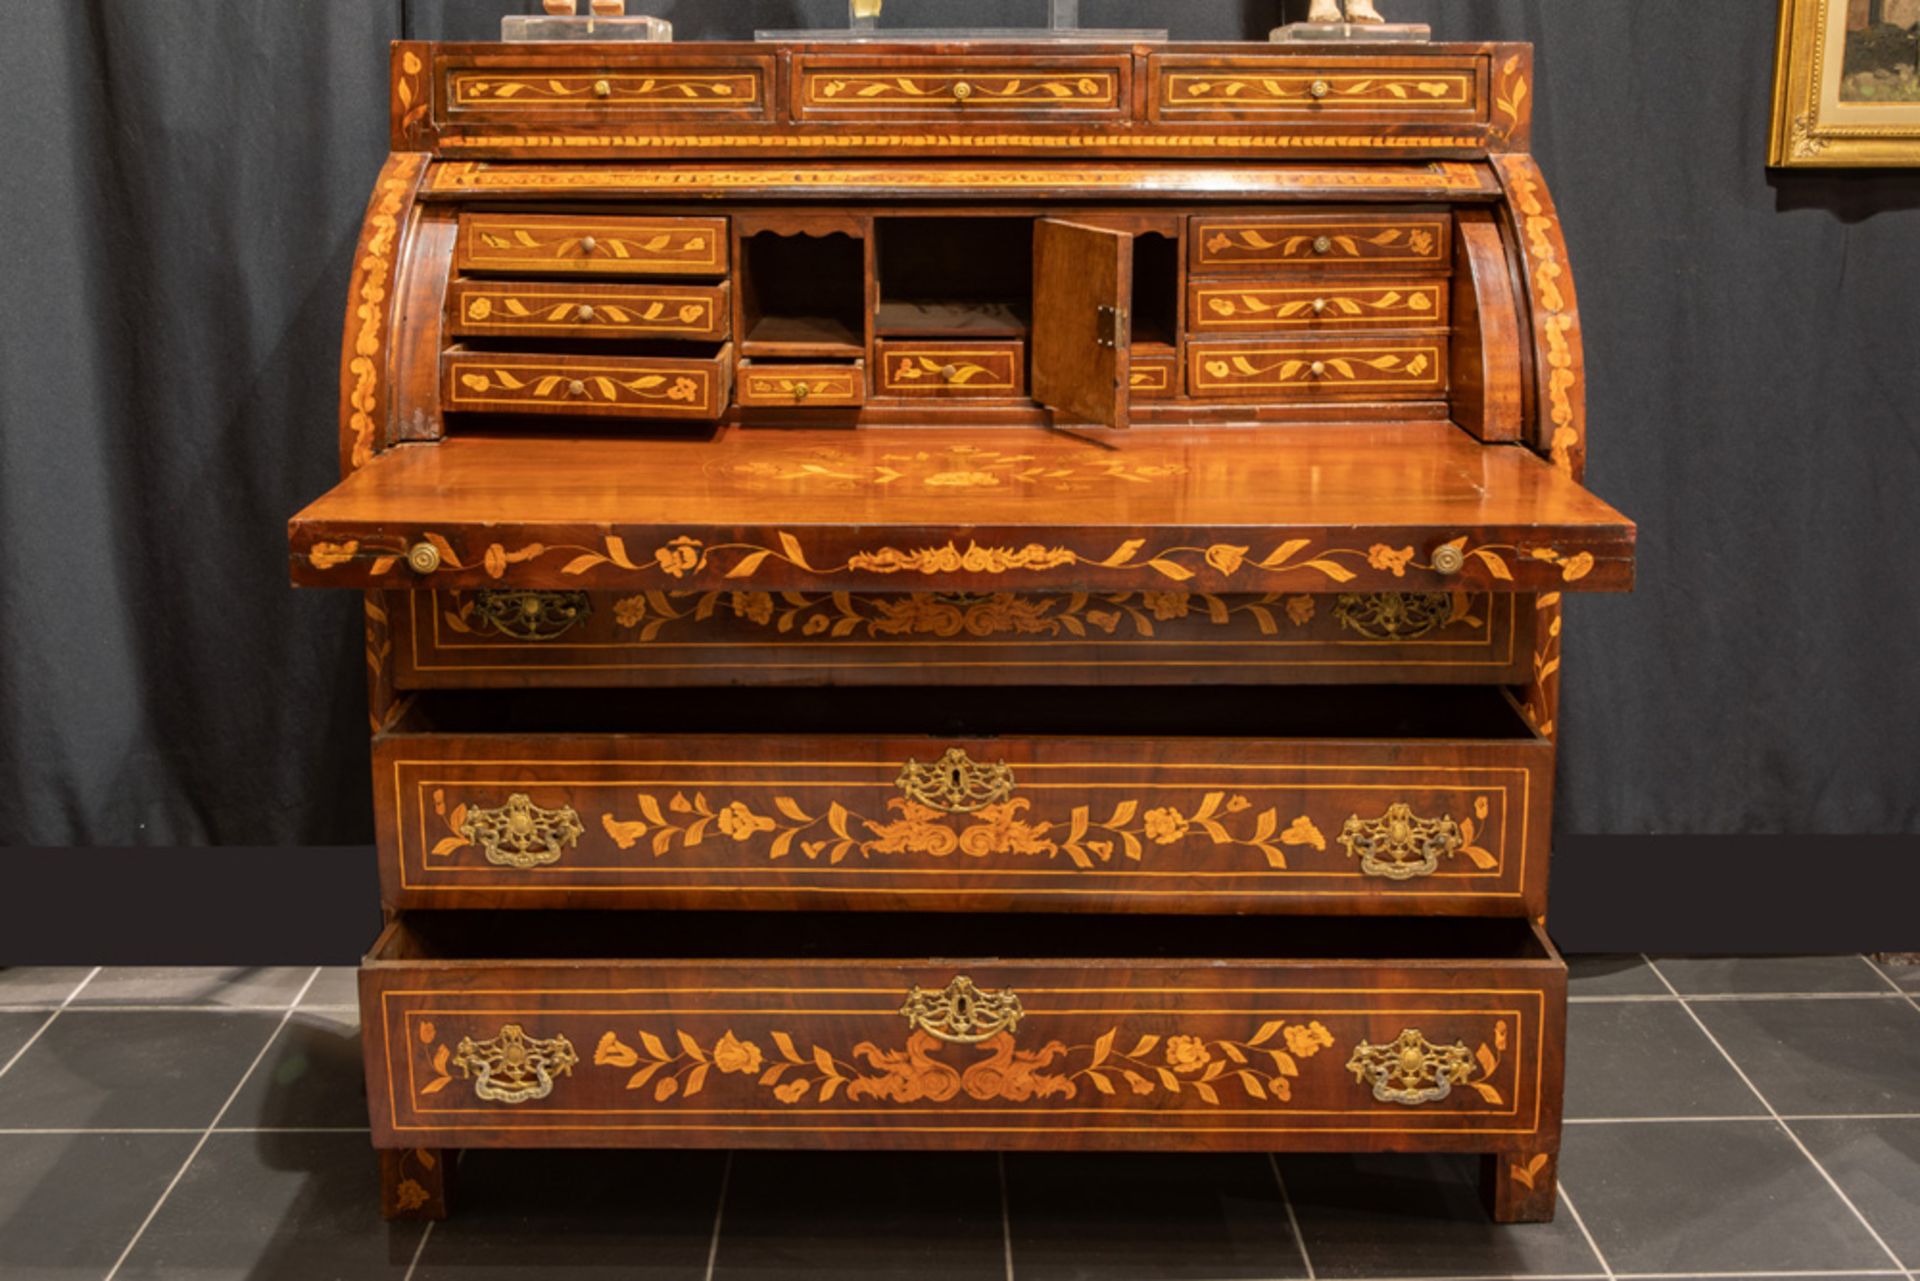 early 19th Cent. Empire style cylinder-bureau in marquetry with three drawers and two pillars || - Image 2 of 4